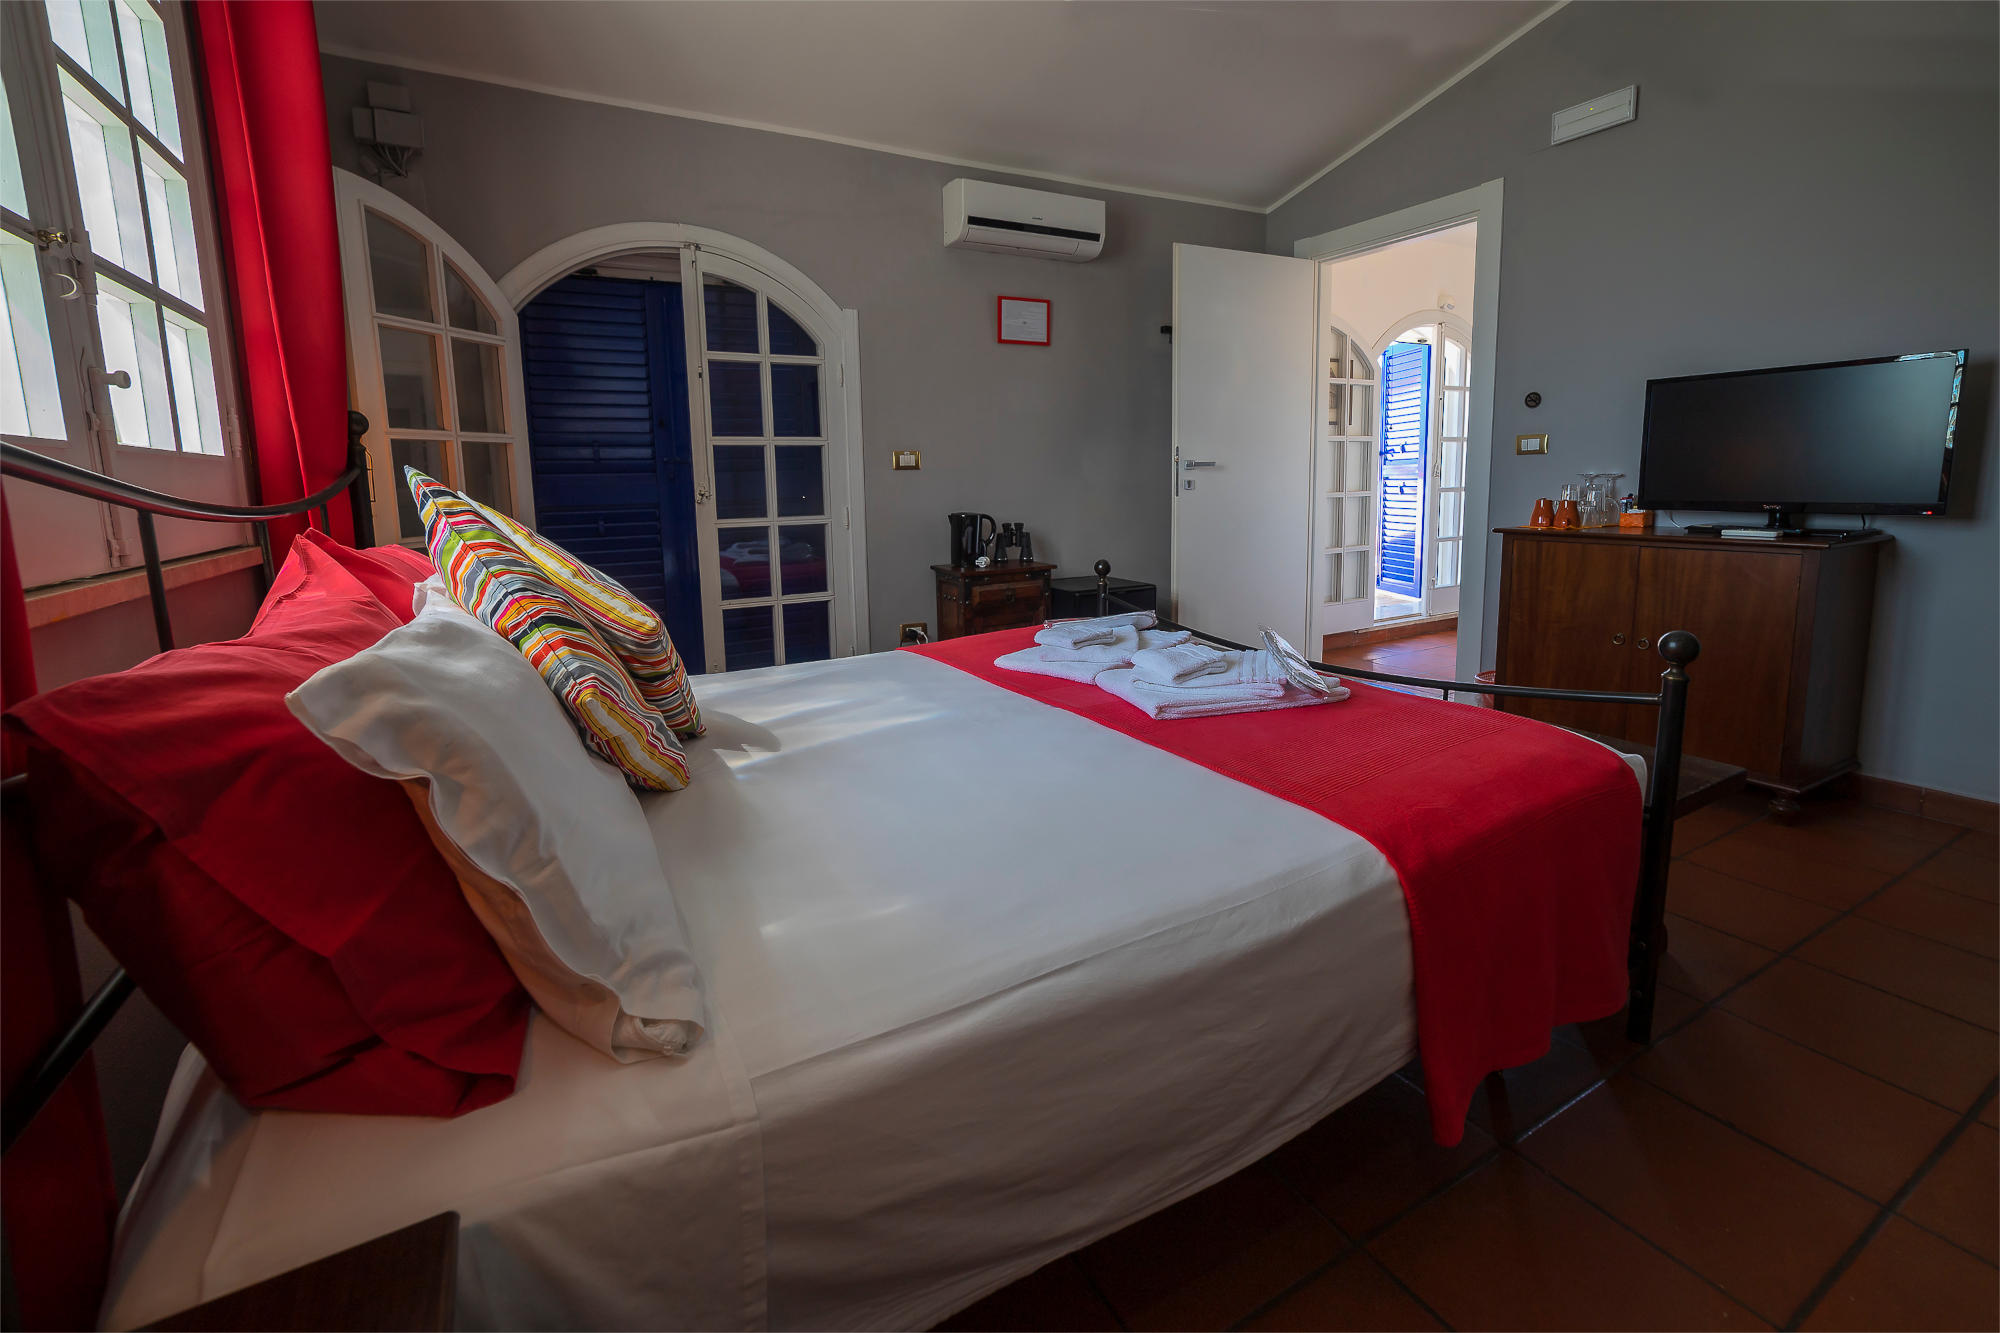 Le Saline B&B Siracusa Grey Room: double bed and view towards the windows door